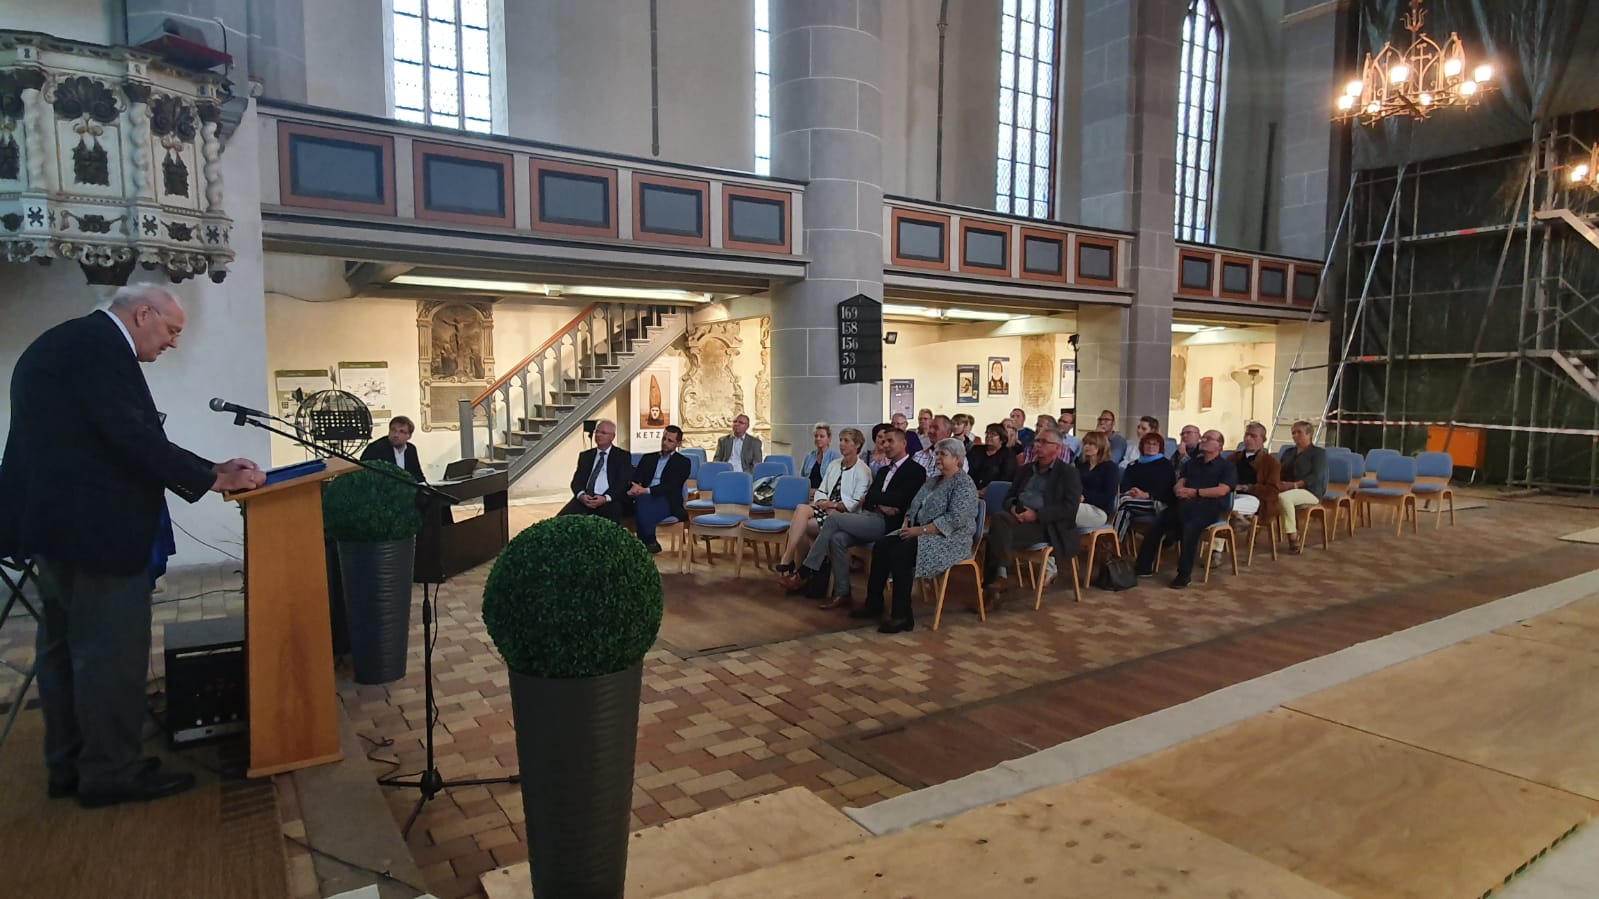 08.81.2019 - Themenabend in Havelberg - 